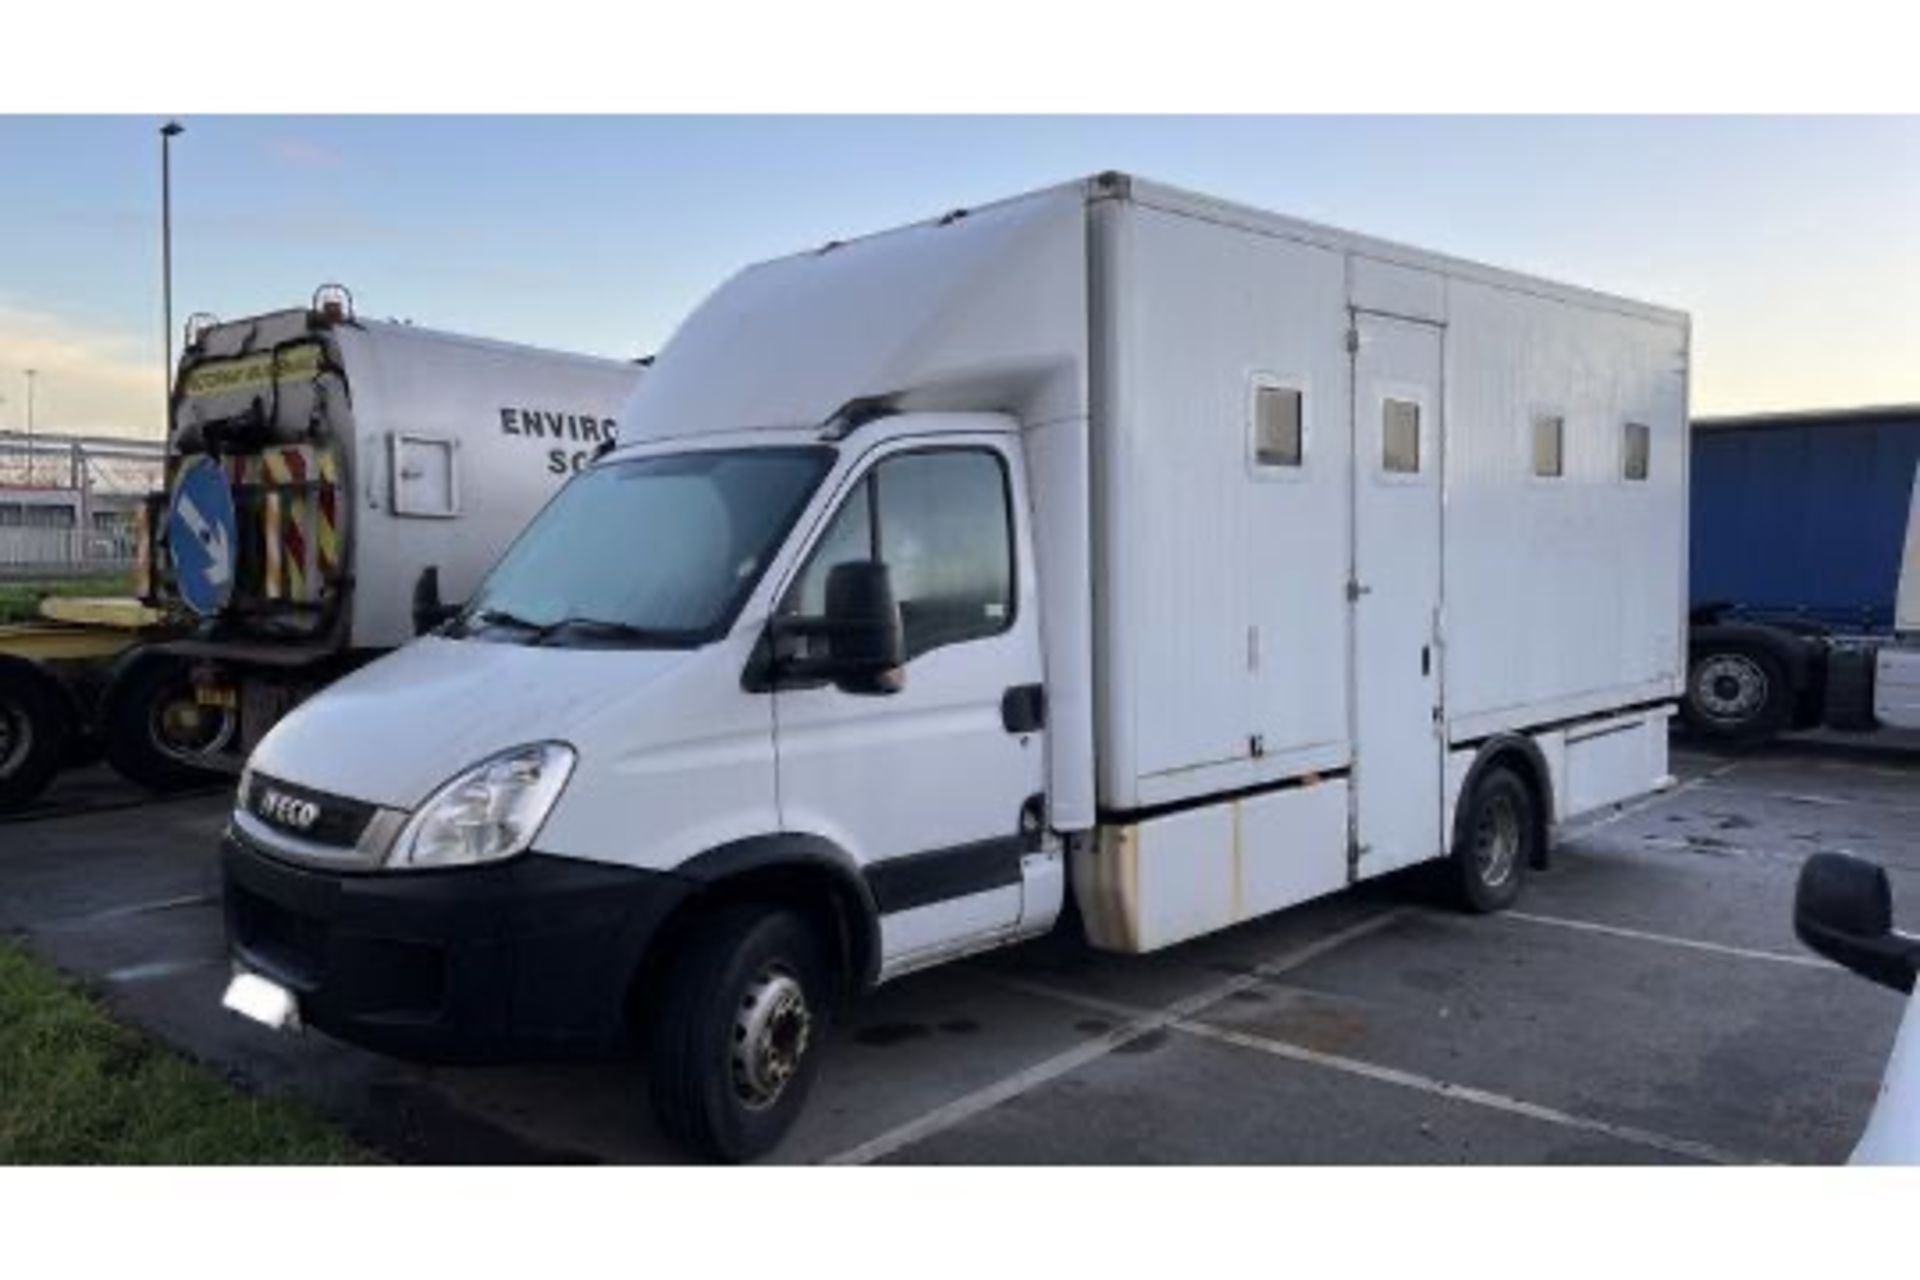 BX11 TCZ. 2011 IVECO DAILY 70C17. BOX VAN. 4X2. DIESEL MANUAL GEARBOX. REAR VIEW CAMERA 6 X SPEED - Image 3 of 24